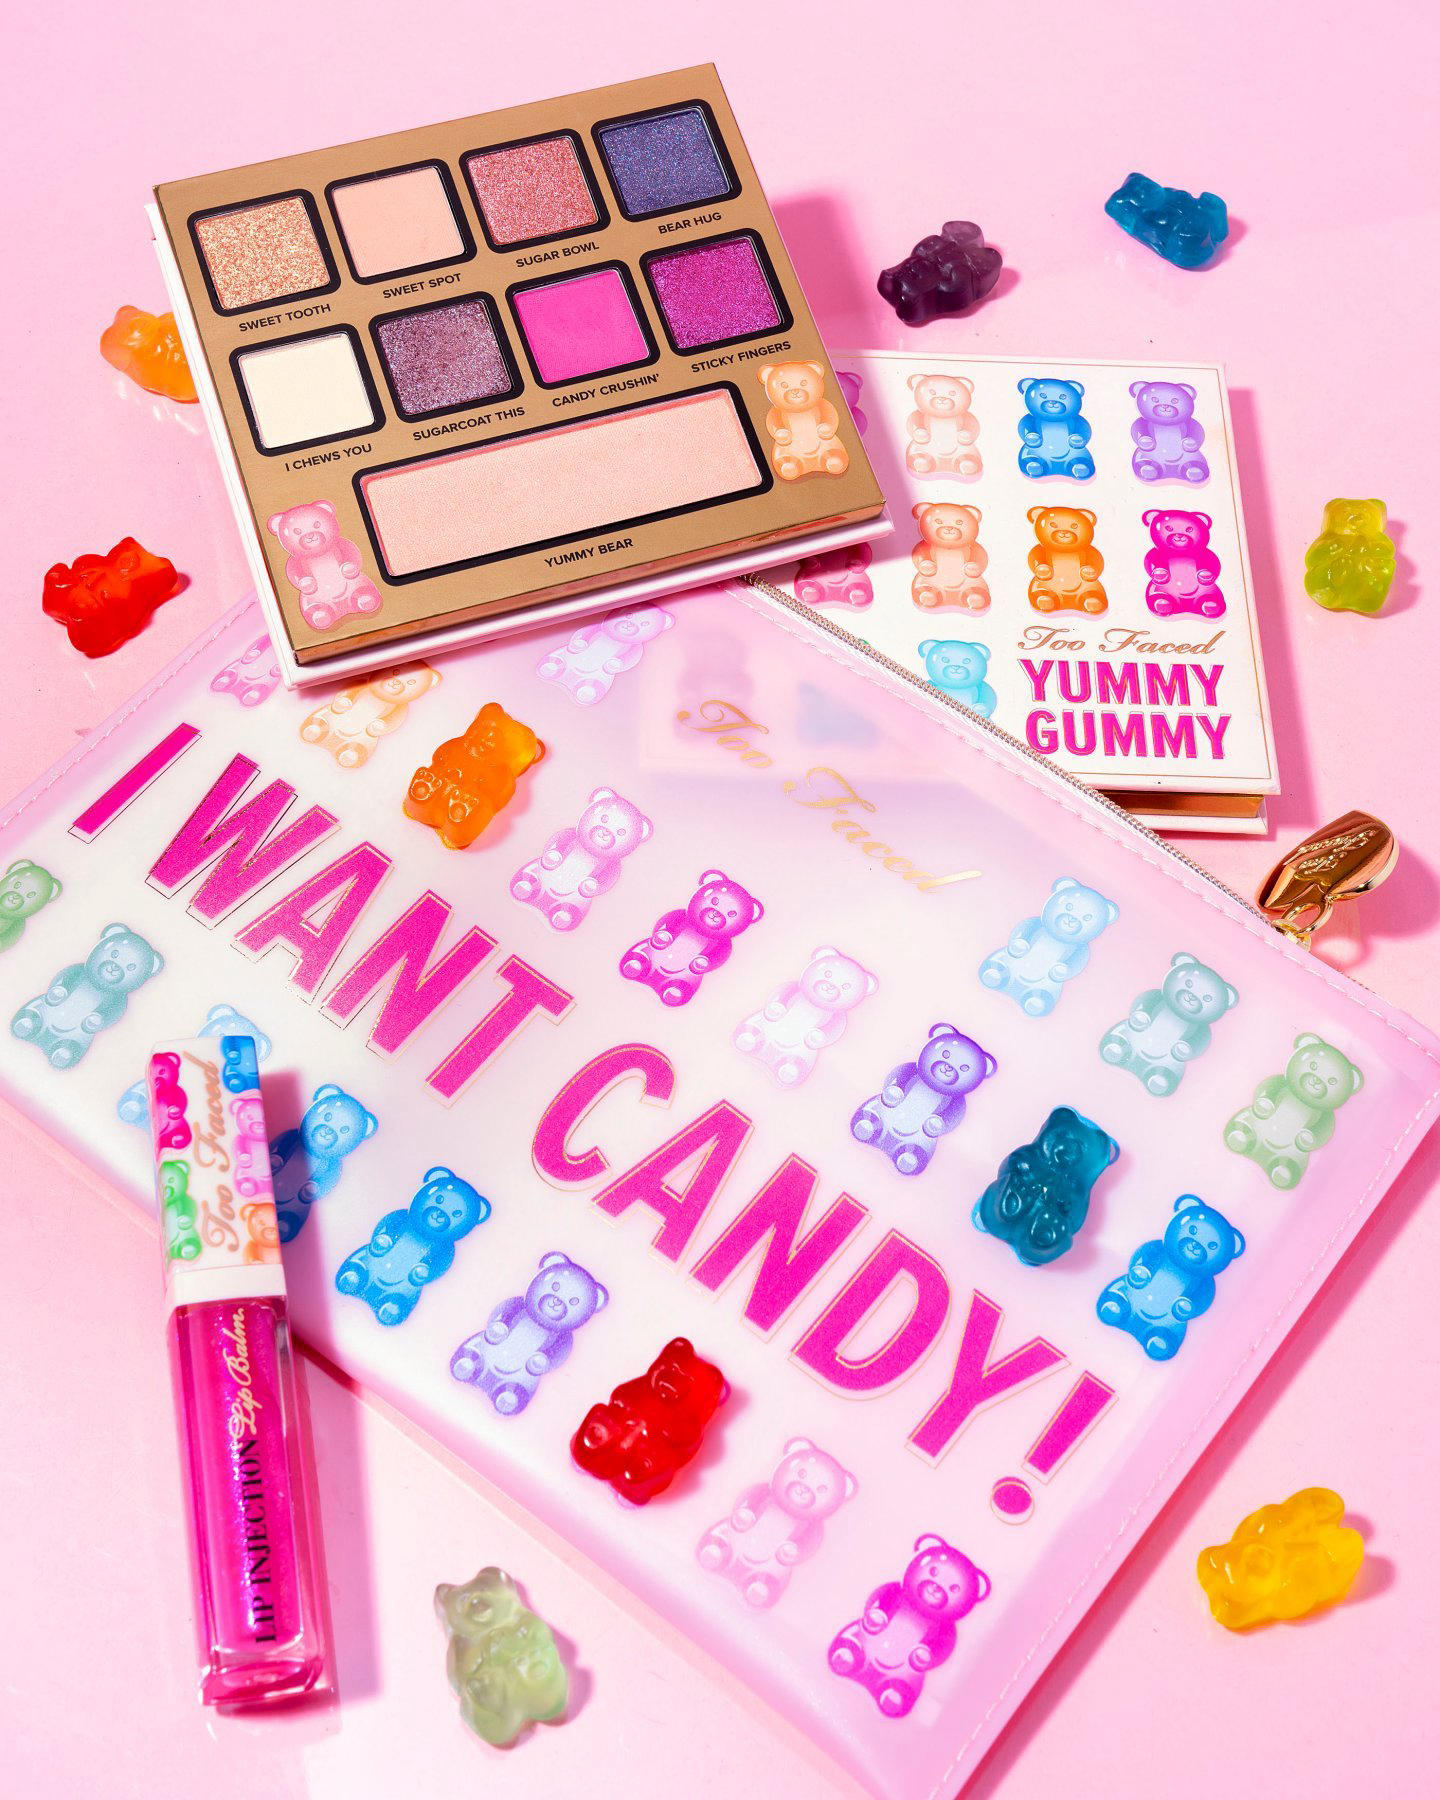 image  1 Too Faced Cosmetics - Satisfy your candy cravings with our Yummy Gummy Makeup Collection